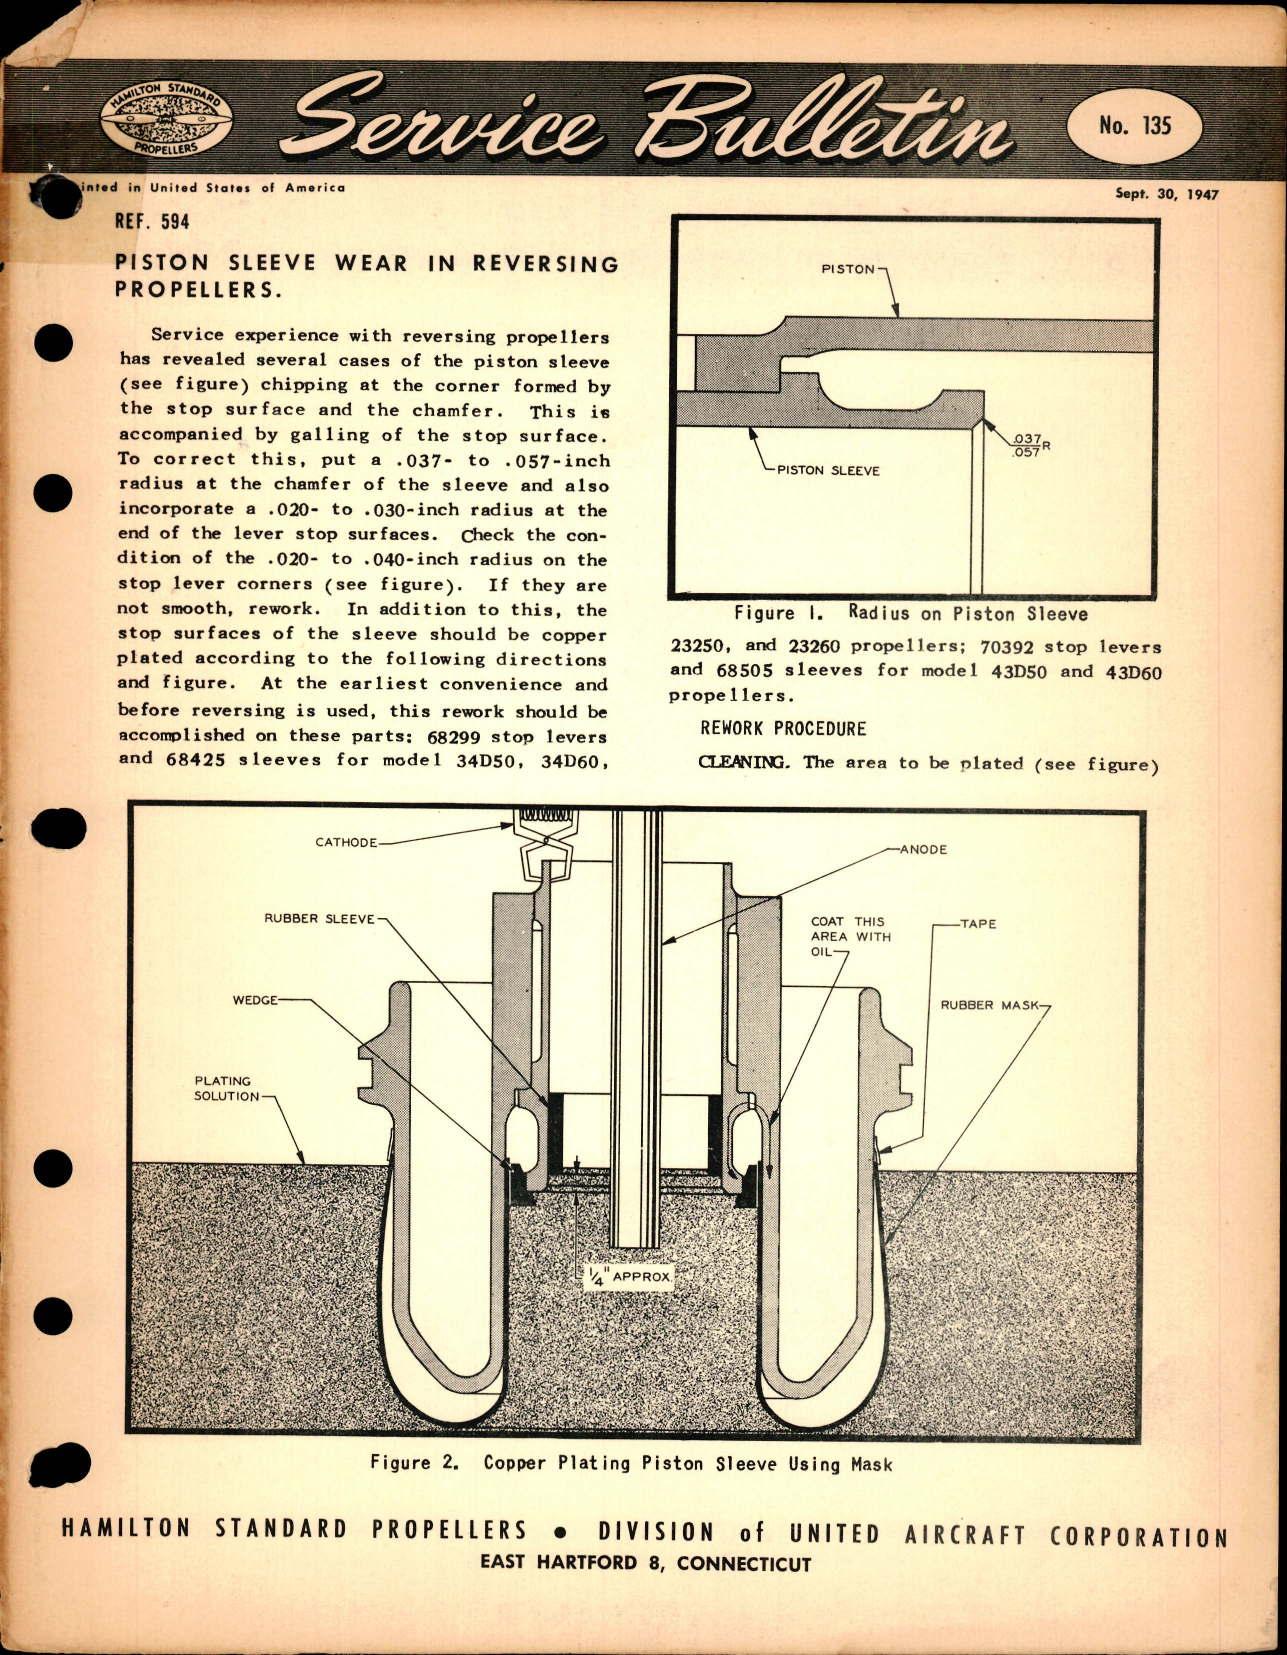 Sample page 1 from AirCorps Library document: Piston Sleeve Wear in Reversing Propellers, Ref 594